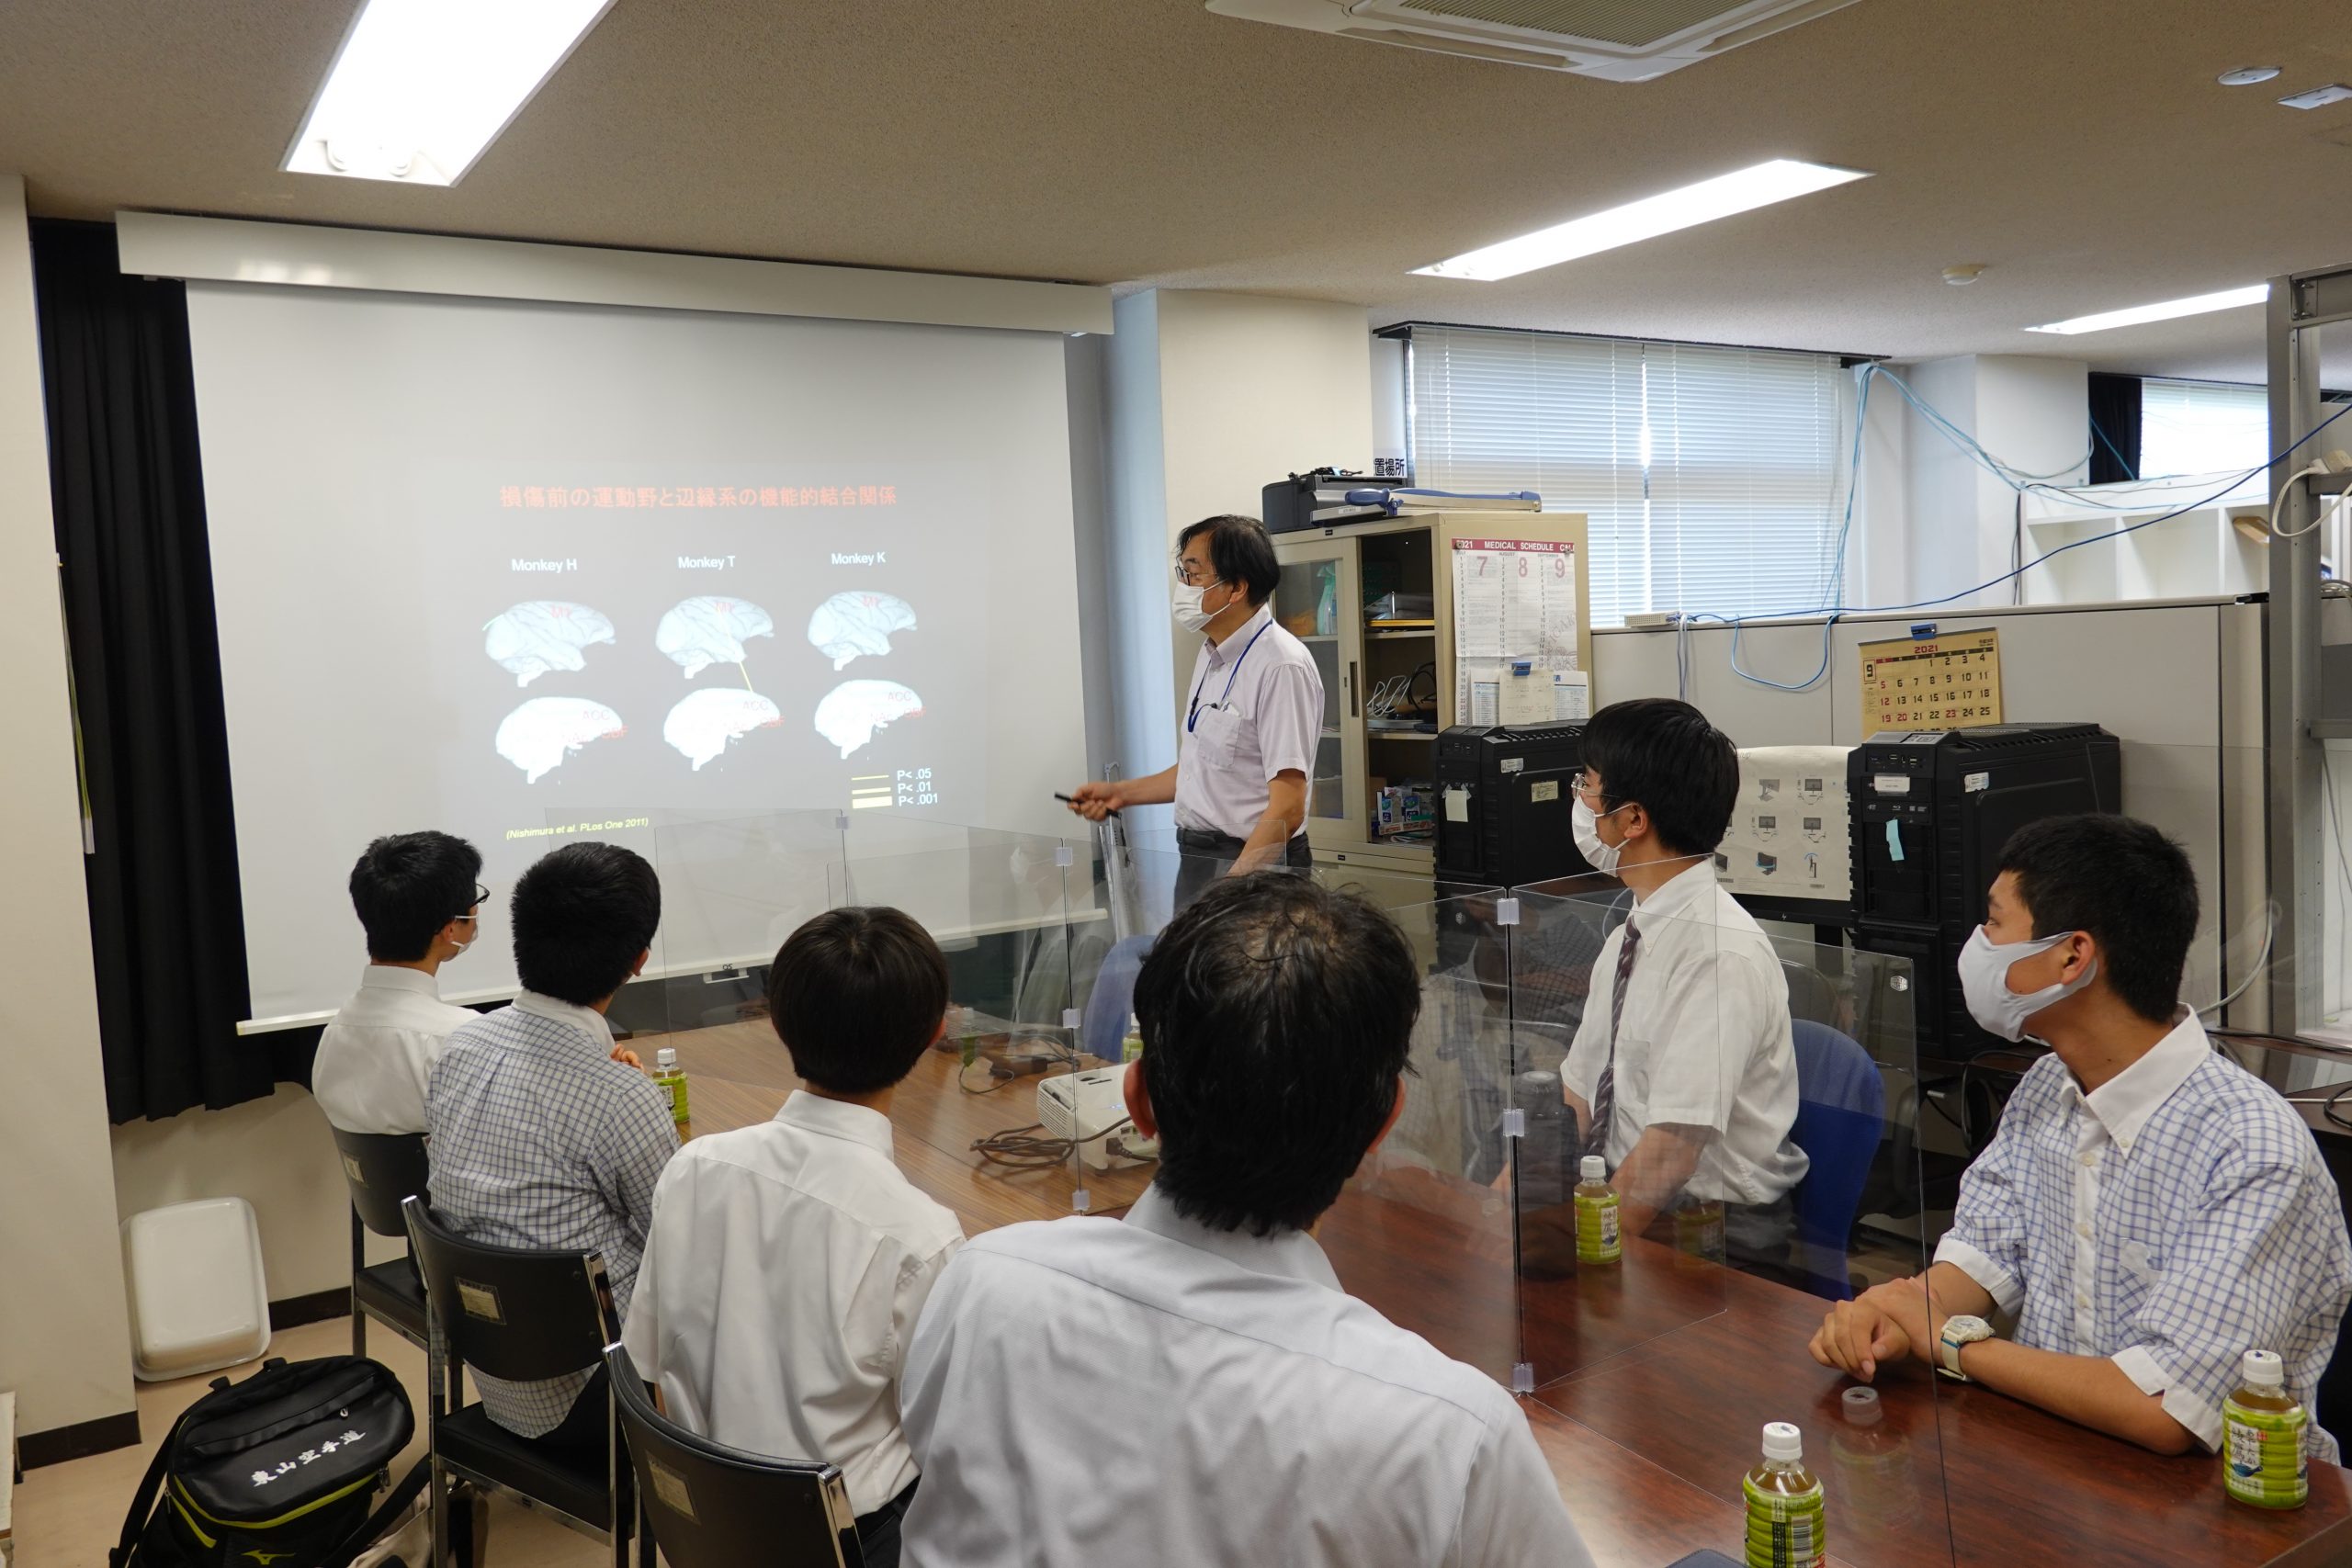 Dr. Isa gave a lecture on the mechanism how the evolutionally old systems can compensate for the impaired function of the new systems in case of brain and spinal cord injury and the neural mechanism of blindsight.